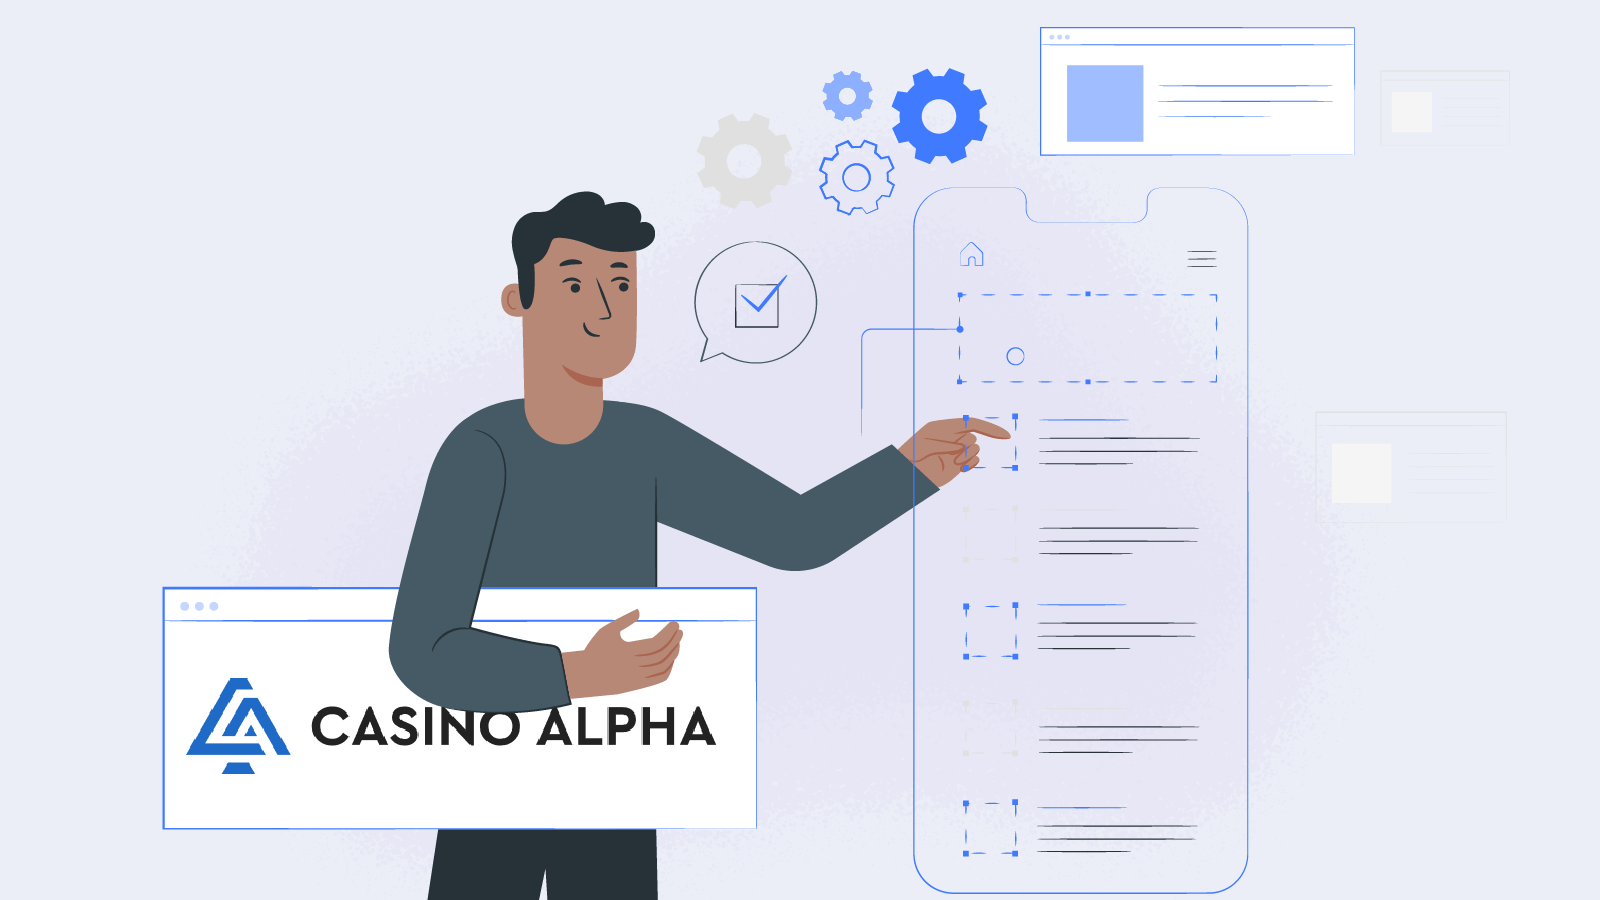 The CasinoAlpha testing and conclusions